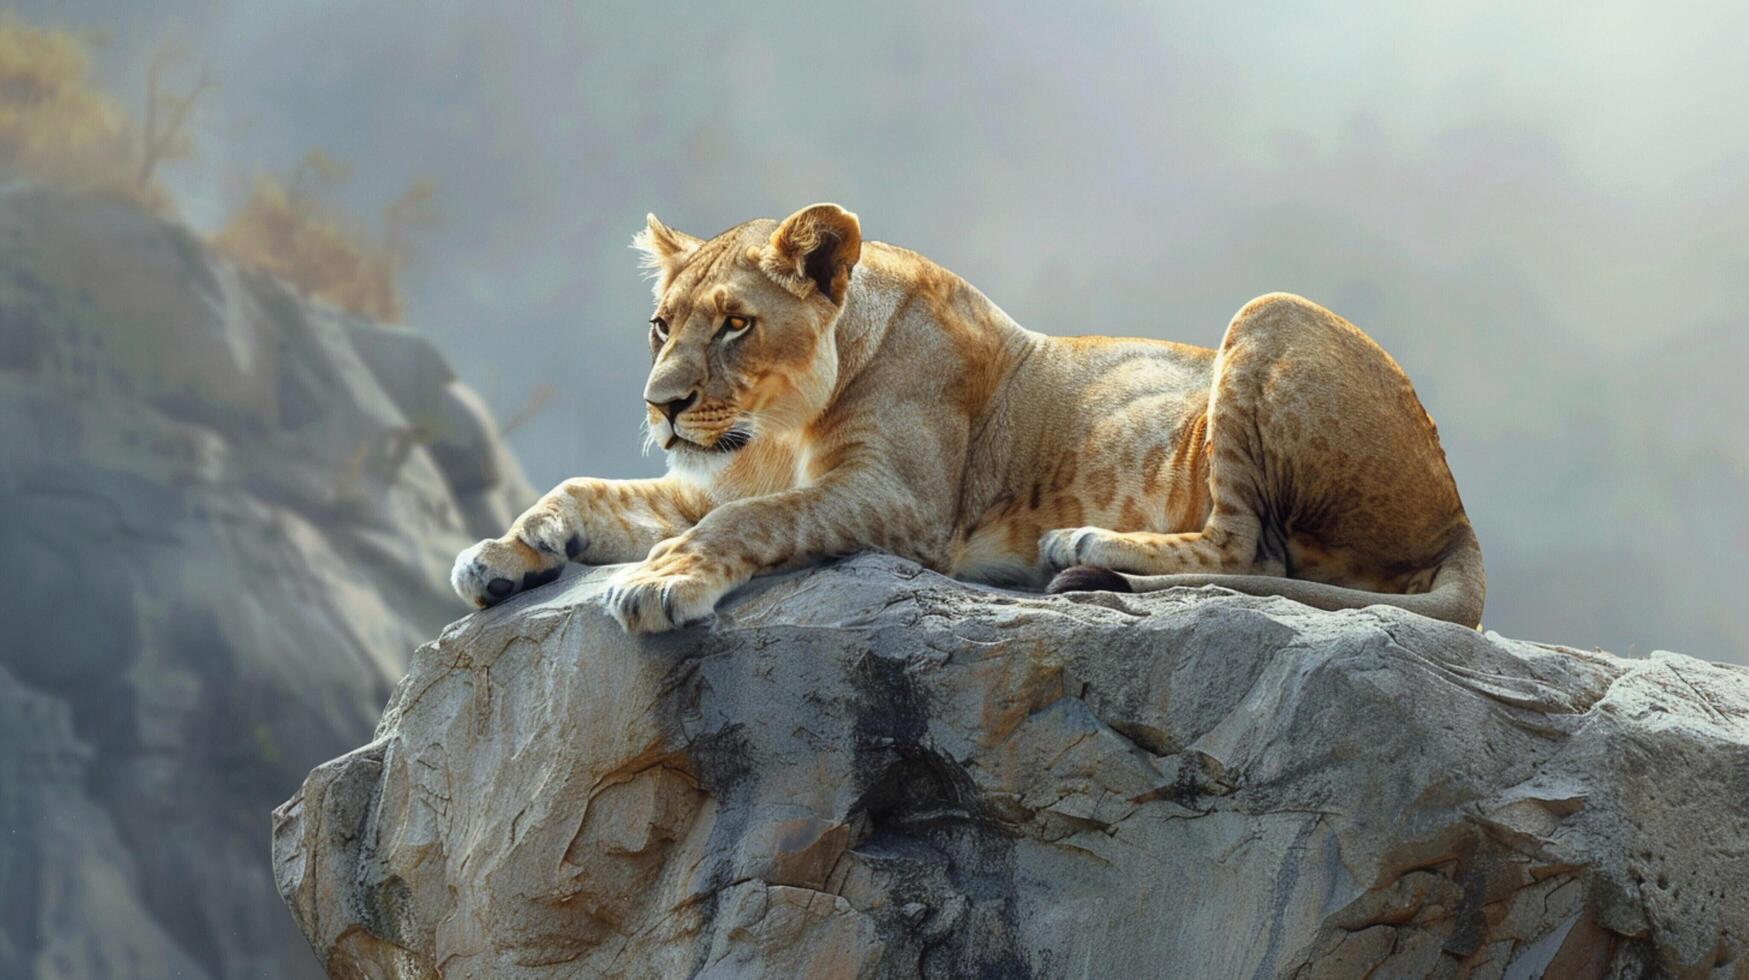 a painting of a lioness on a rock photo